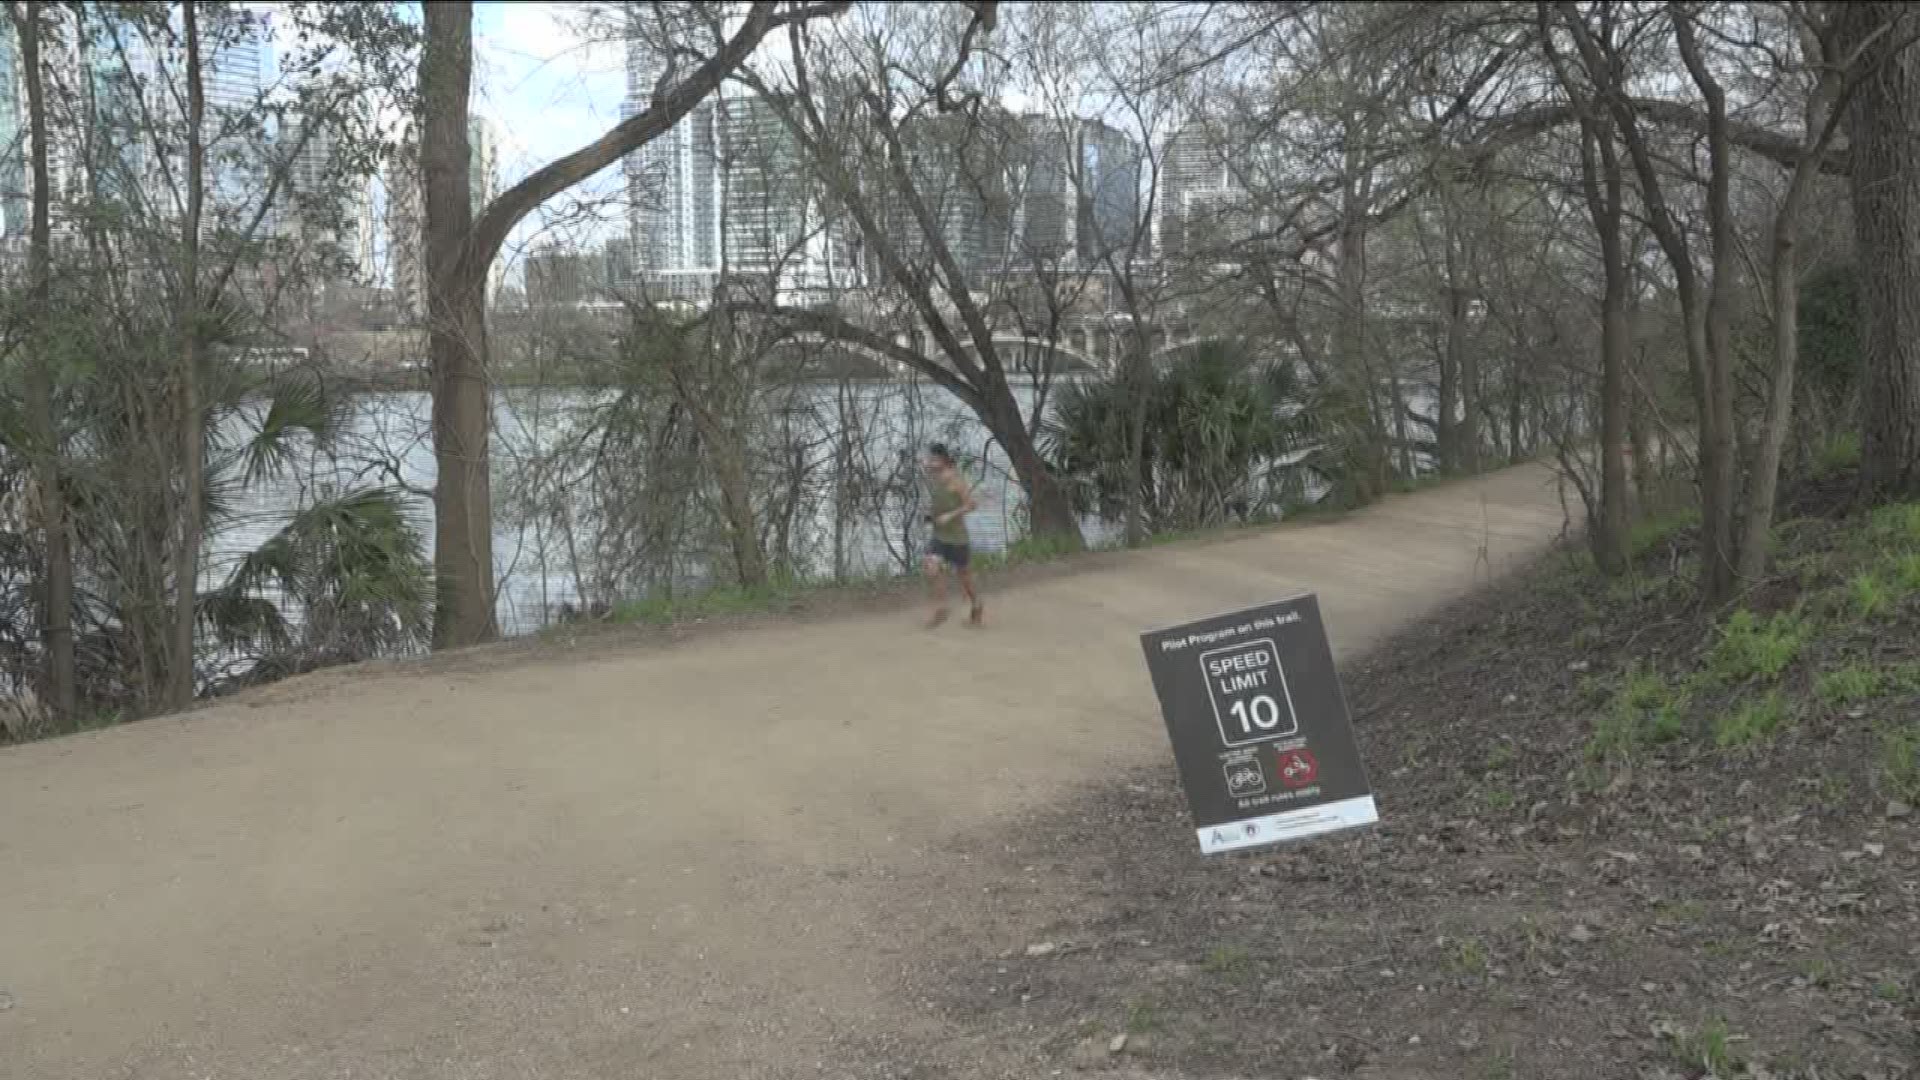 The reason city leaders decided to ban scooters on the Austin trail because of what it is made out of.
The gravel is a little bit more dangerous than paved roads for riders.